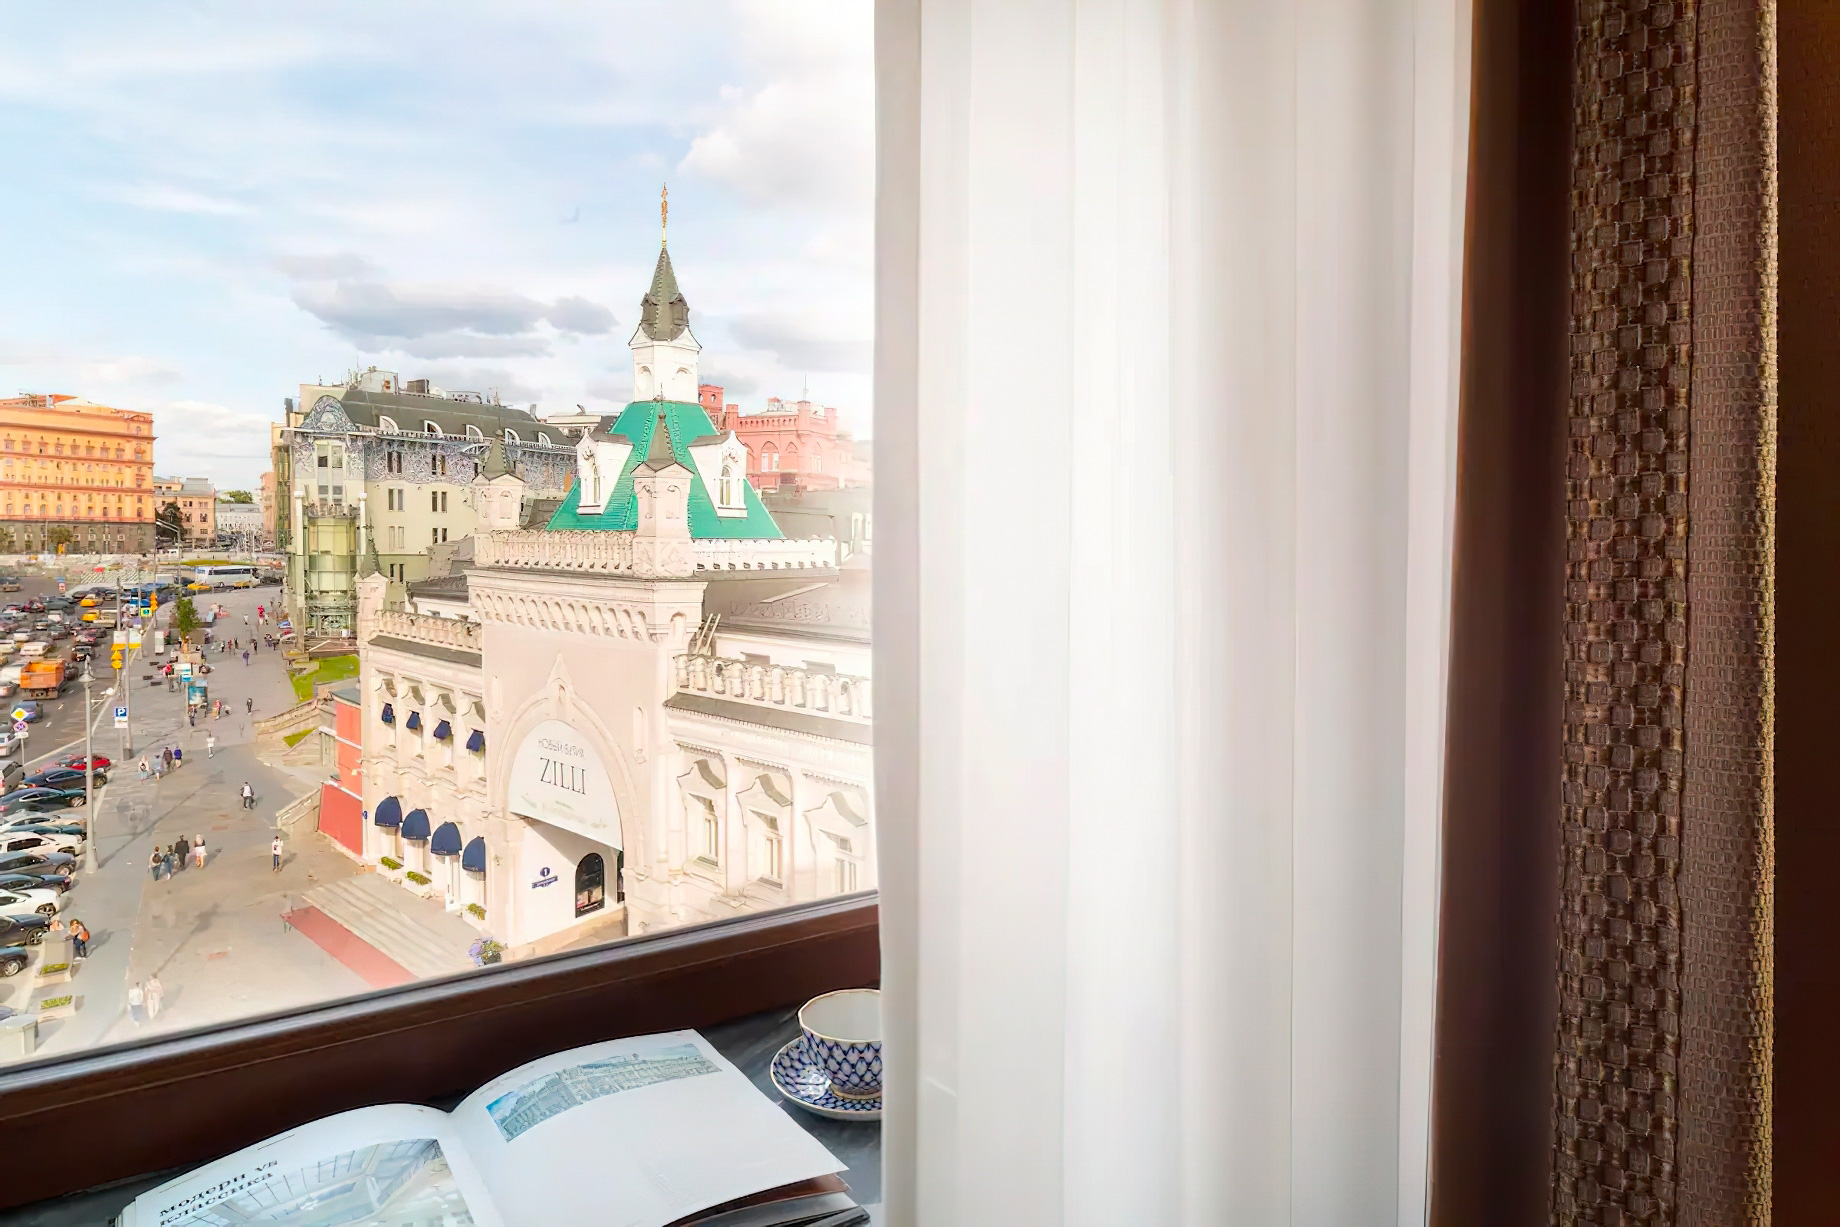 Metropol Hotel Moscow - Moscow, Russia - Guest Room View